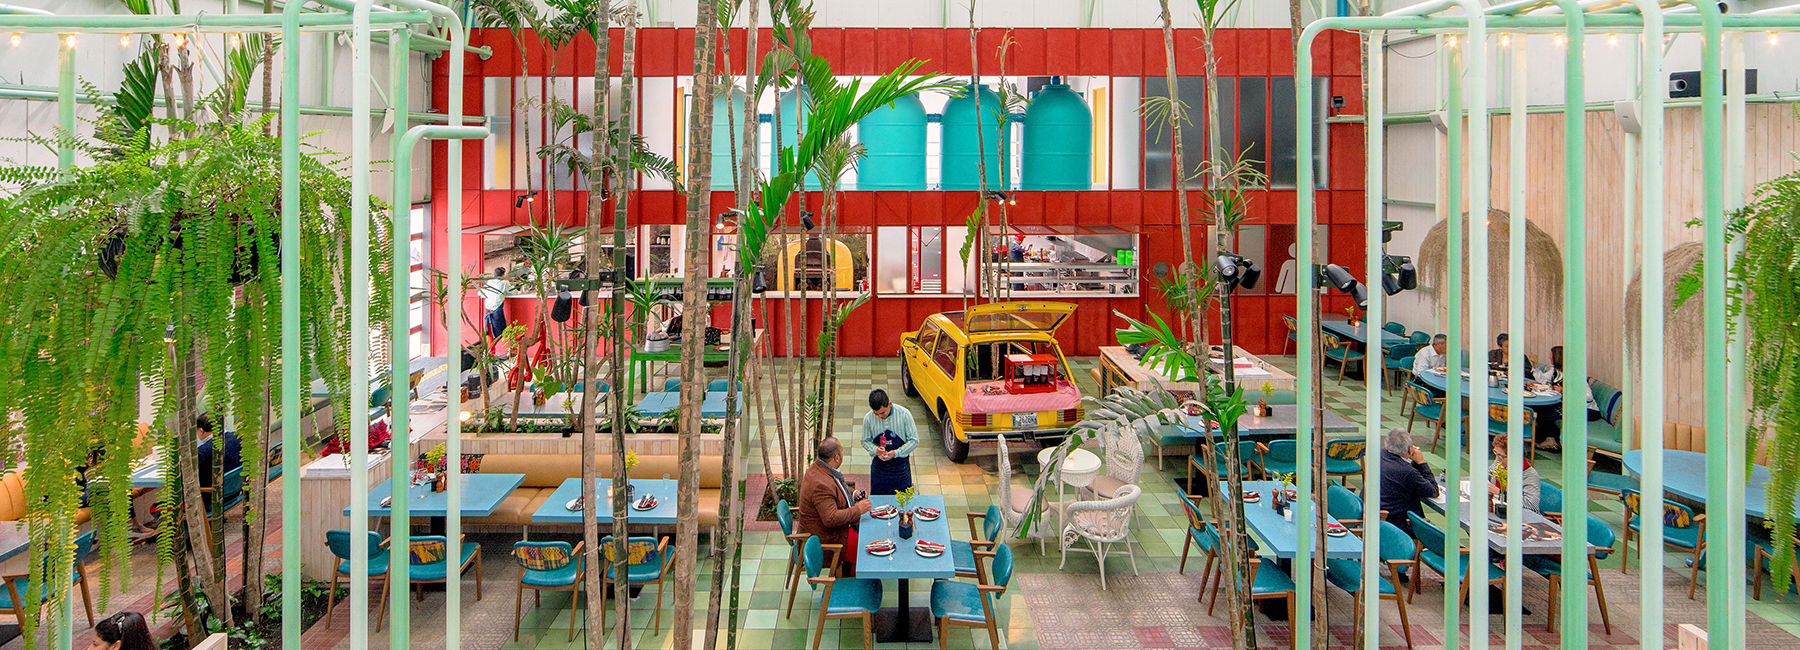 taller KEN populates madero café in guatemala with tropical planting and vintage cars